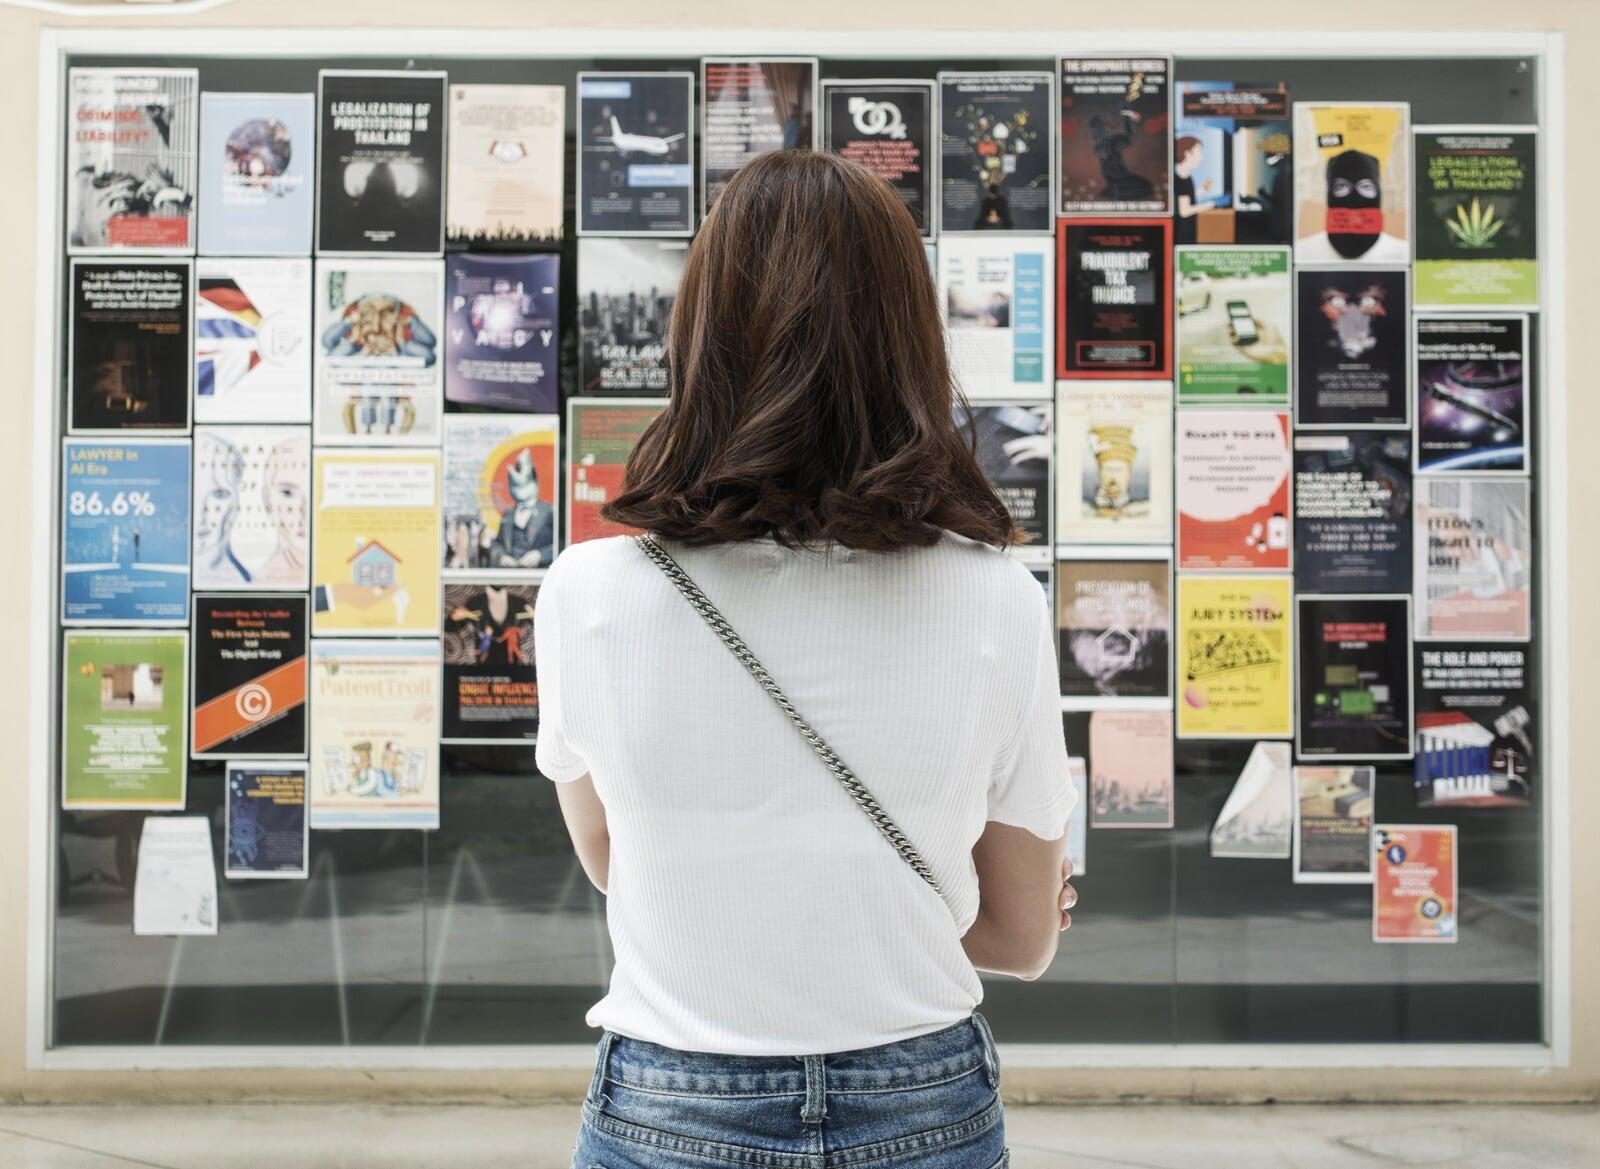 Female student reading posters